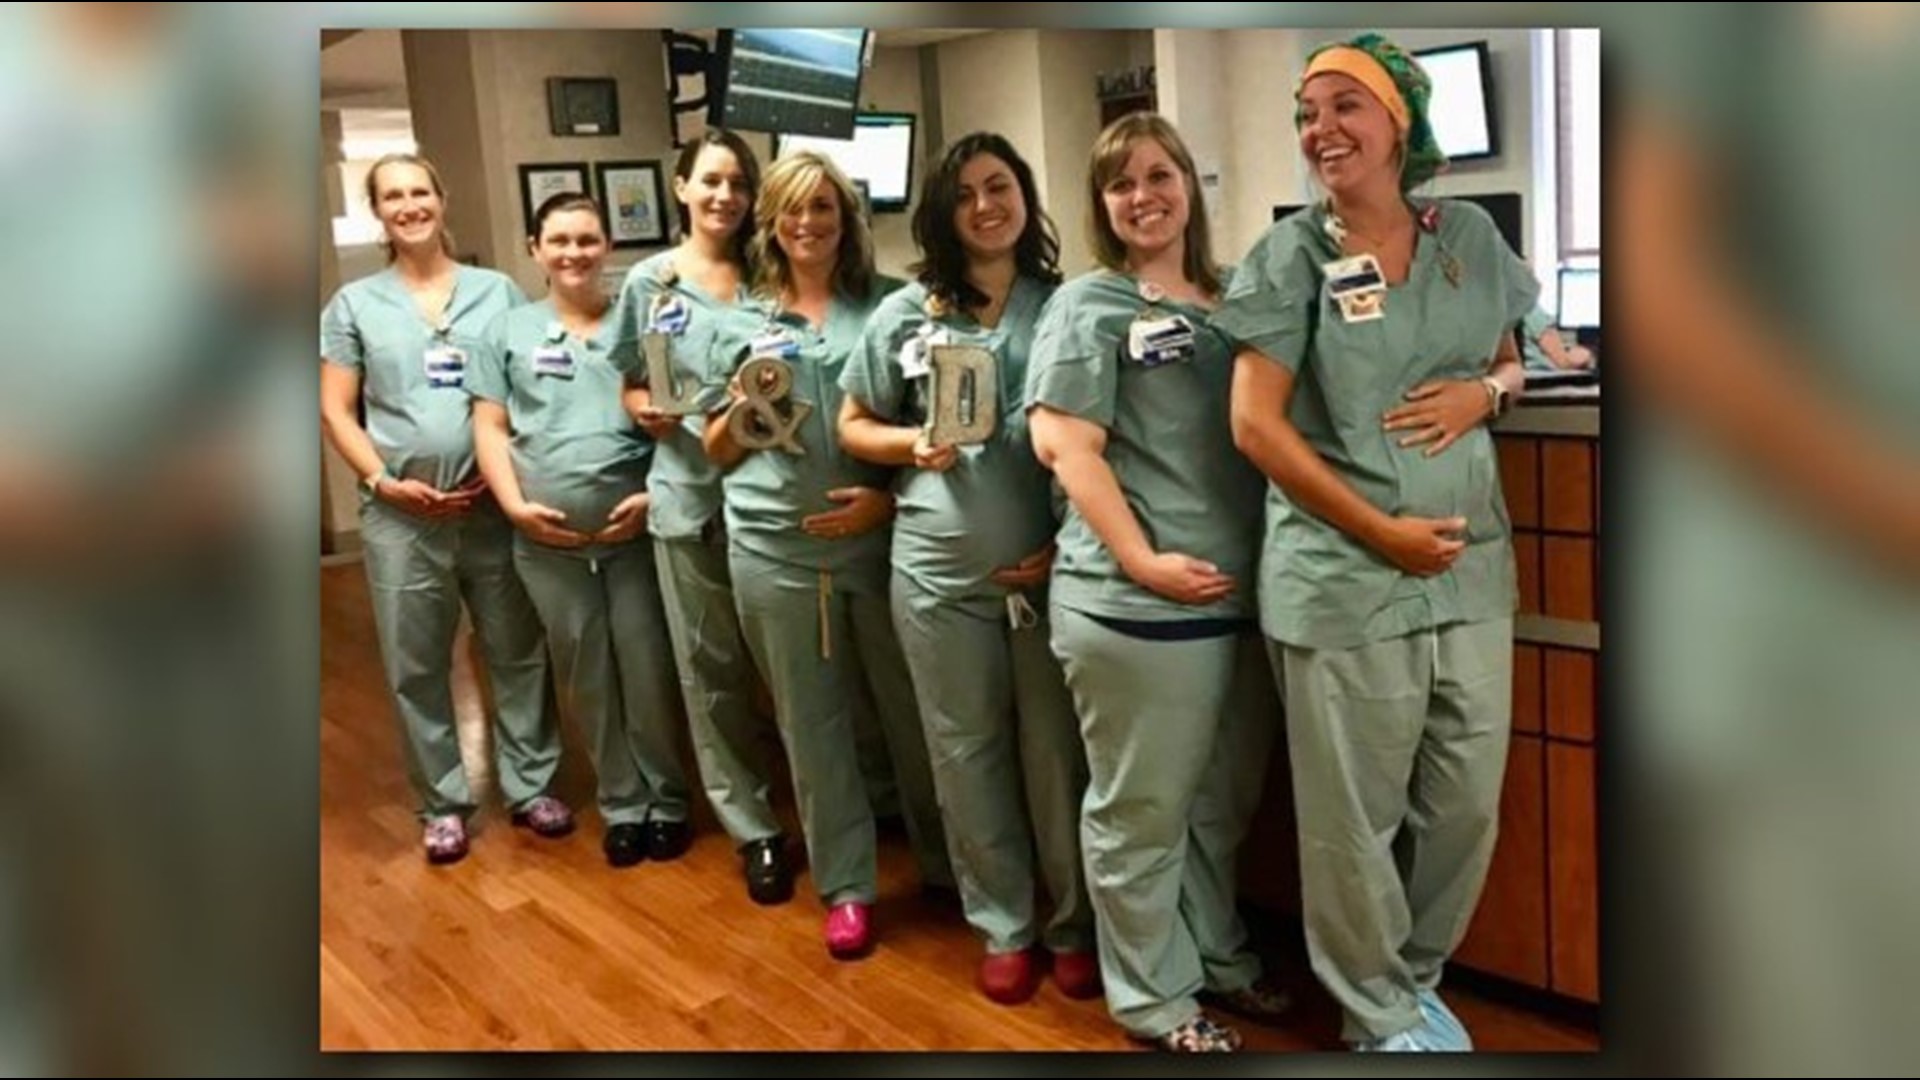 Oh baby 7 Labor and Delivery nurses at N C hospital expecting at the